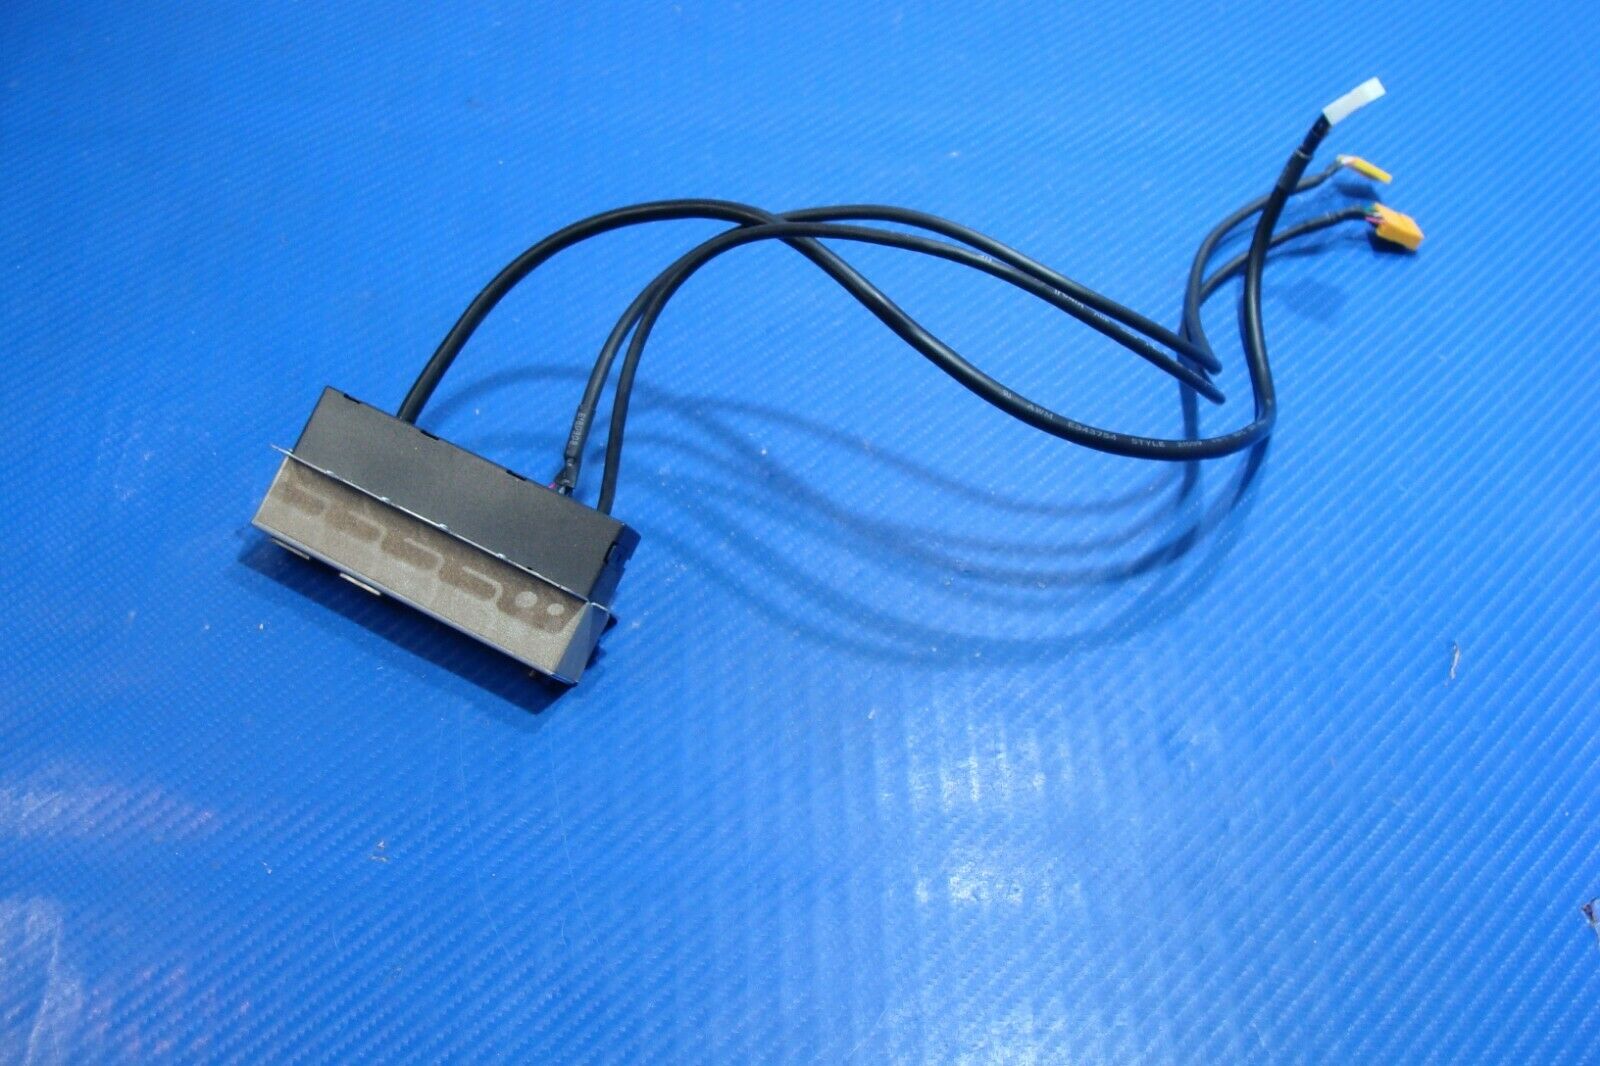 HP 510-a010 Genuine Desktop USB Audio Board with Cable 056.34011.0031 HP